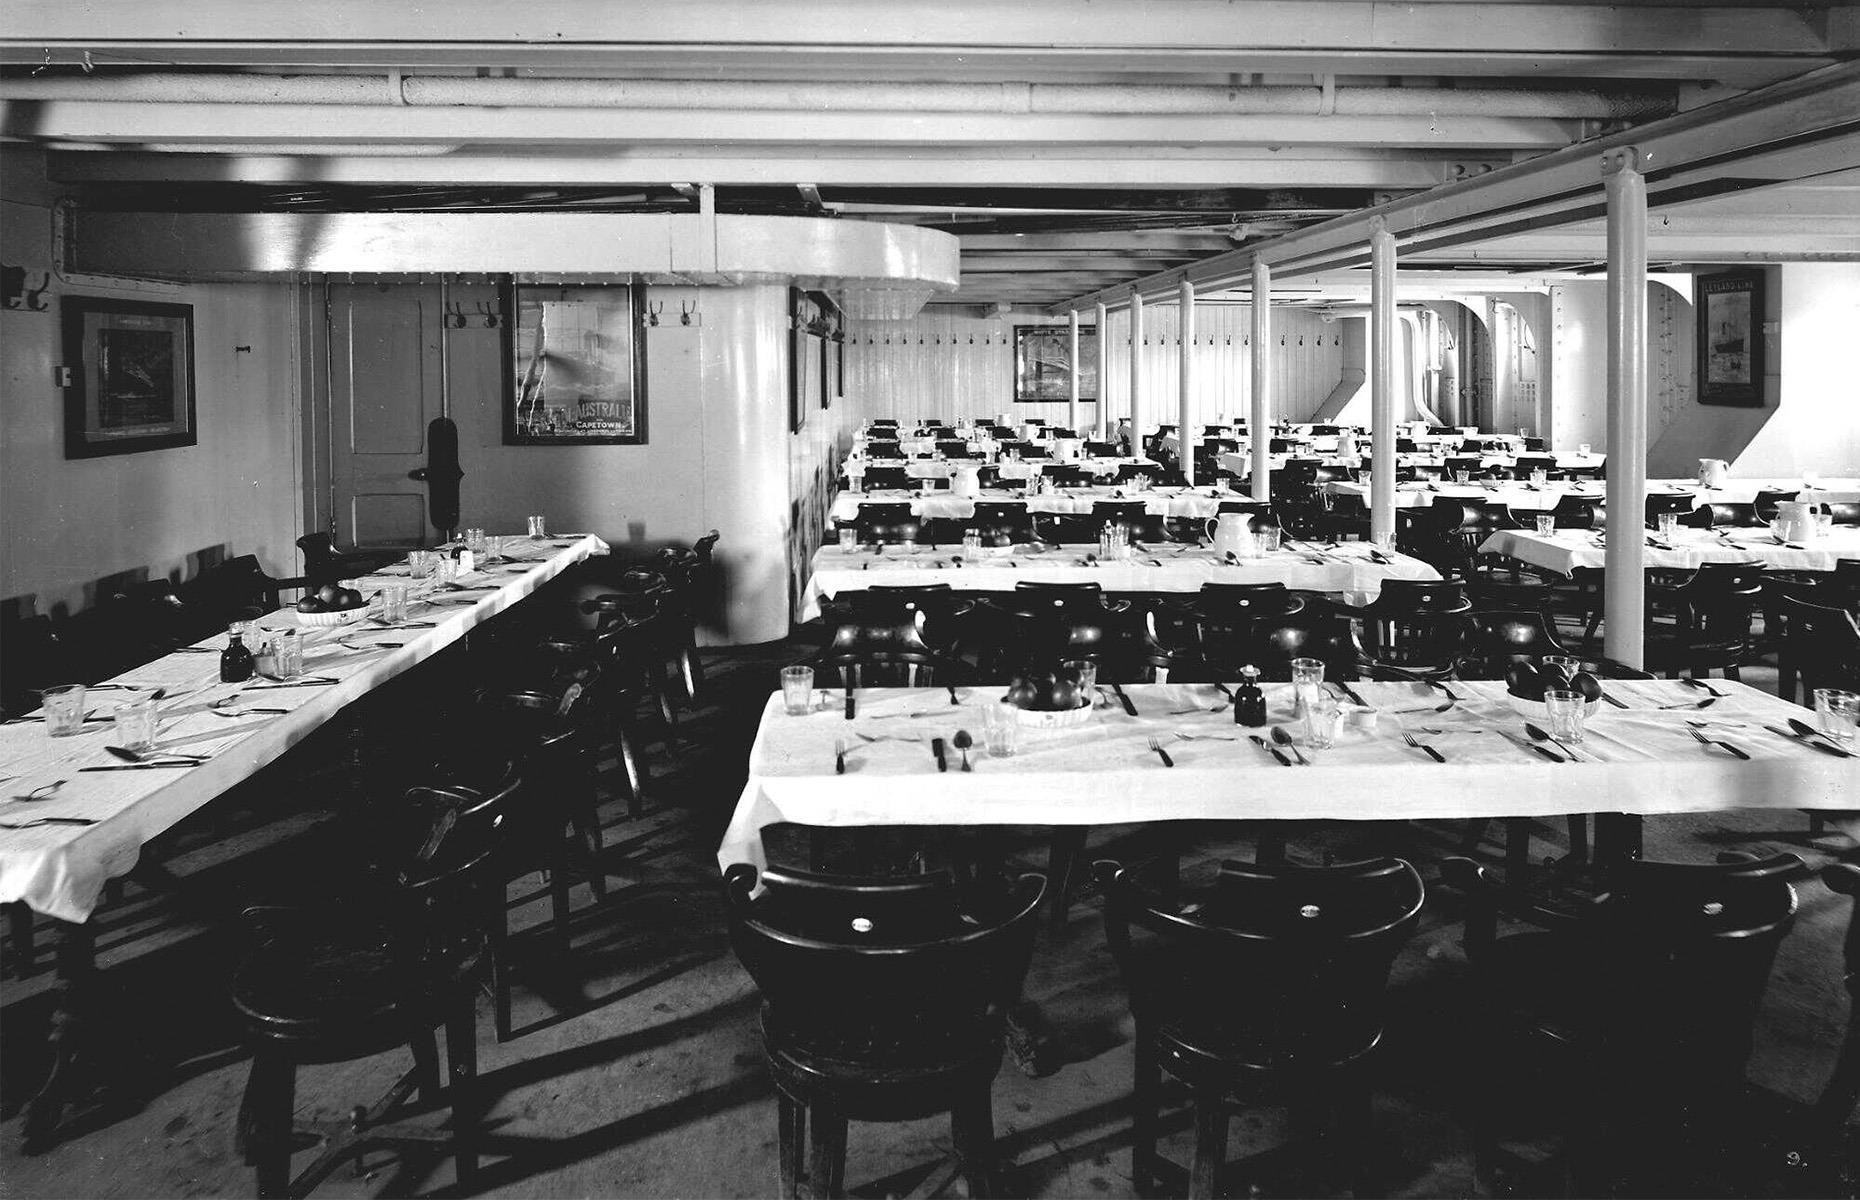 The food and dining rooms were plain in comparison to the first- and second-class experience, but were still a great improvement for steerage passengers of the time, who usually had to bring their own food. The dining areas were painted white with bright side lighting, long communal wooden tables and chairs and enameled walls. Pictured is the third-class dining saloon (1911) on the RMS Olympic, the Titanic’s near-identical sister ship.